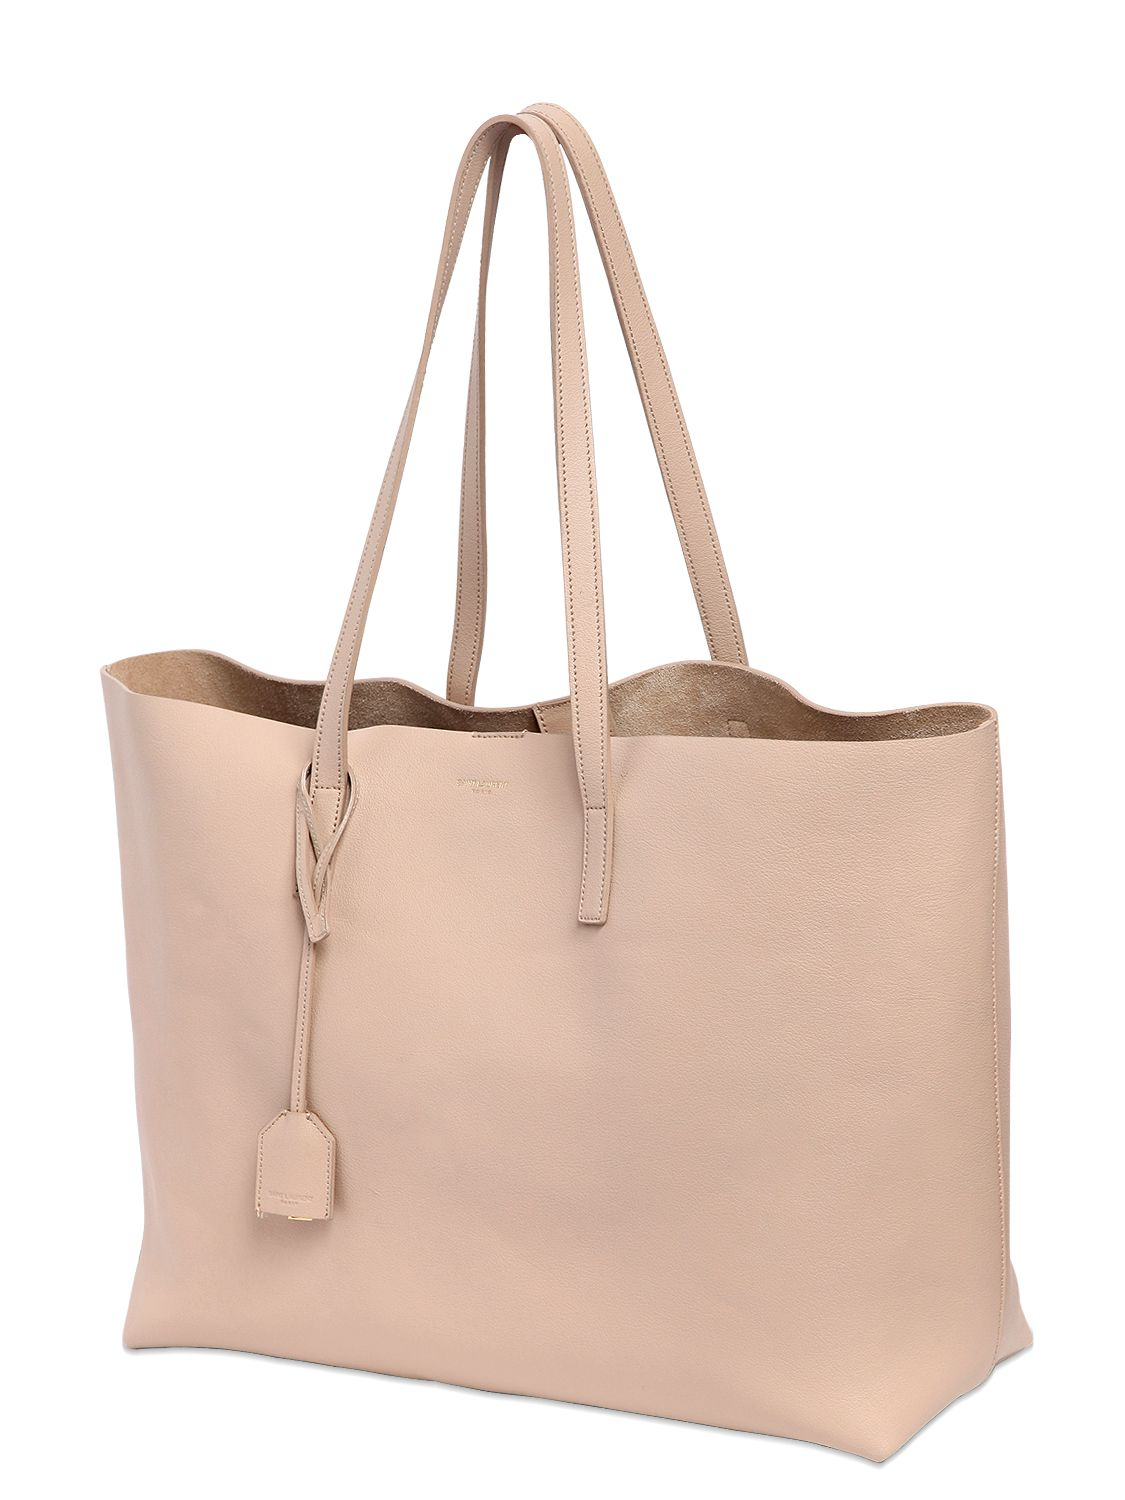 Saint Laurent Soft Leather Tote Bag in Beige (Natural) - Lyst